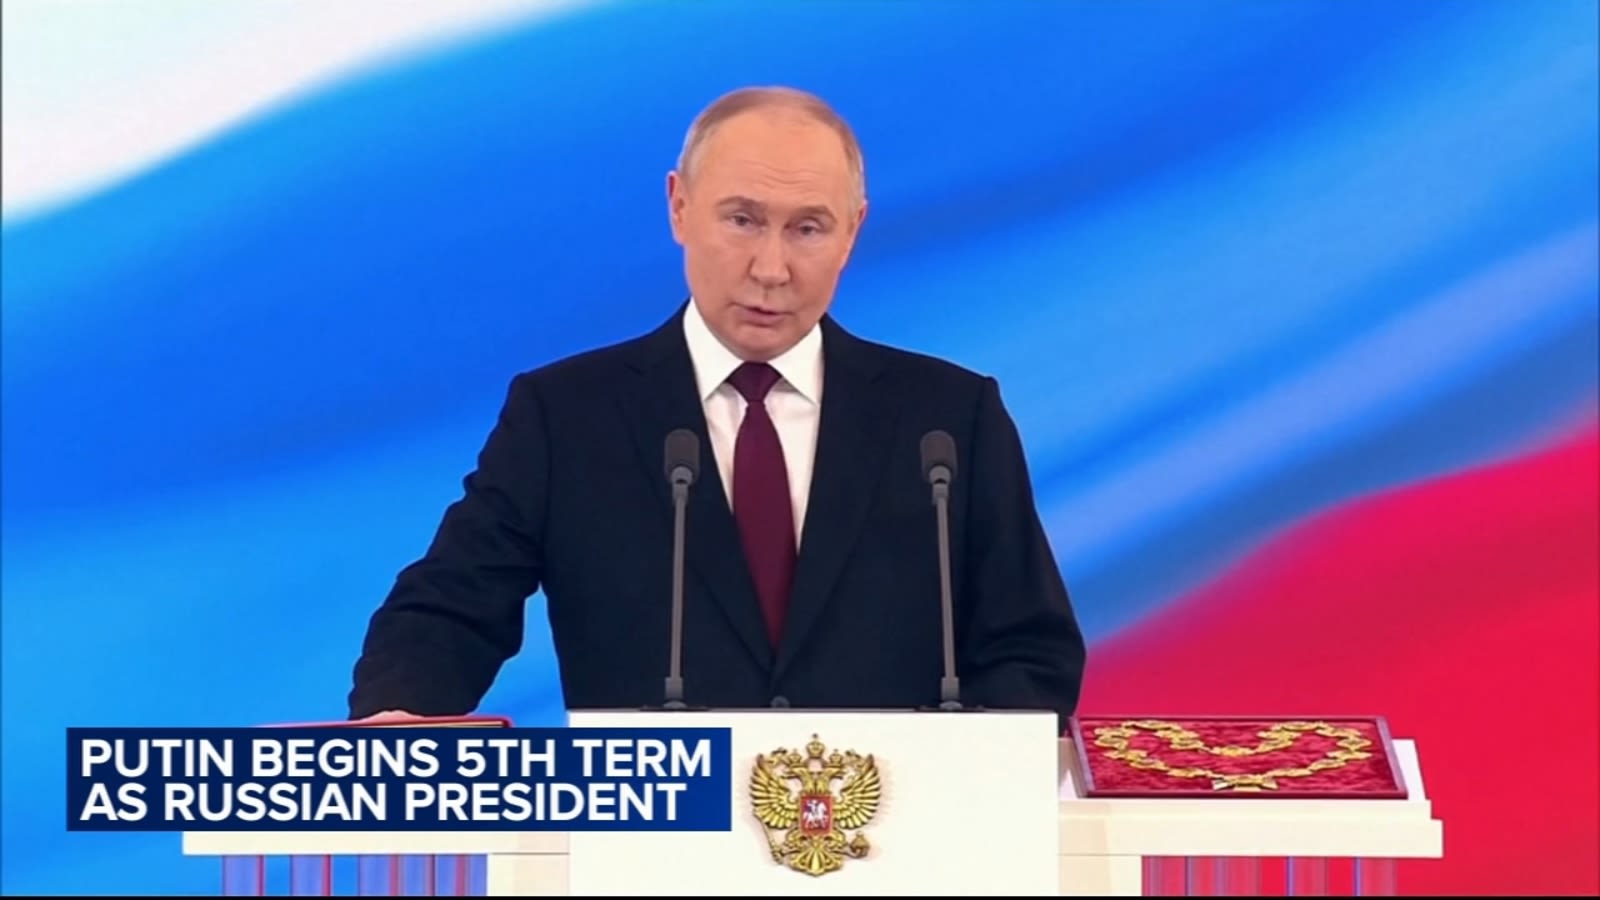 Vladimir Putin begins 5th term as president, embarking on another 6 years as Russia's leader